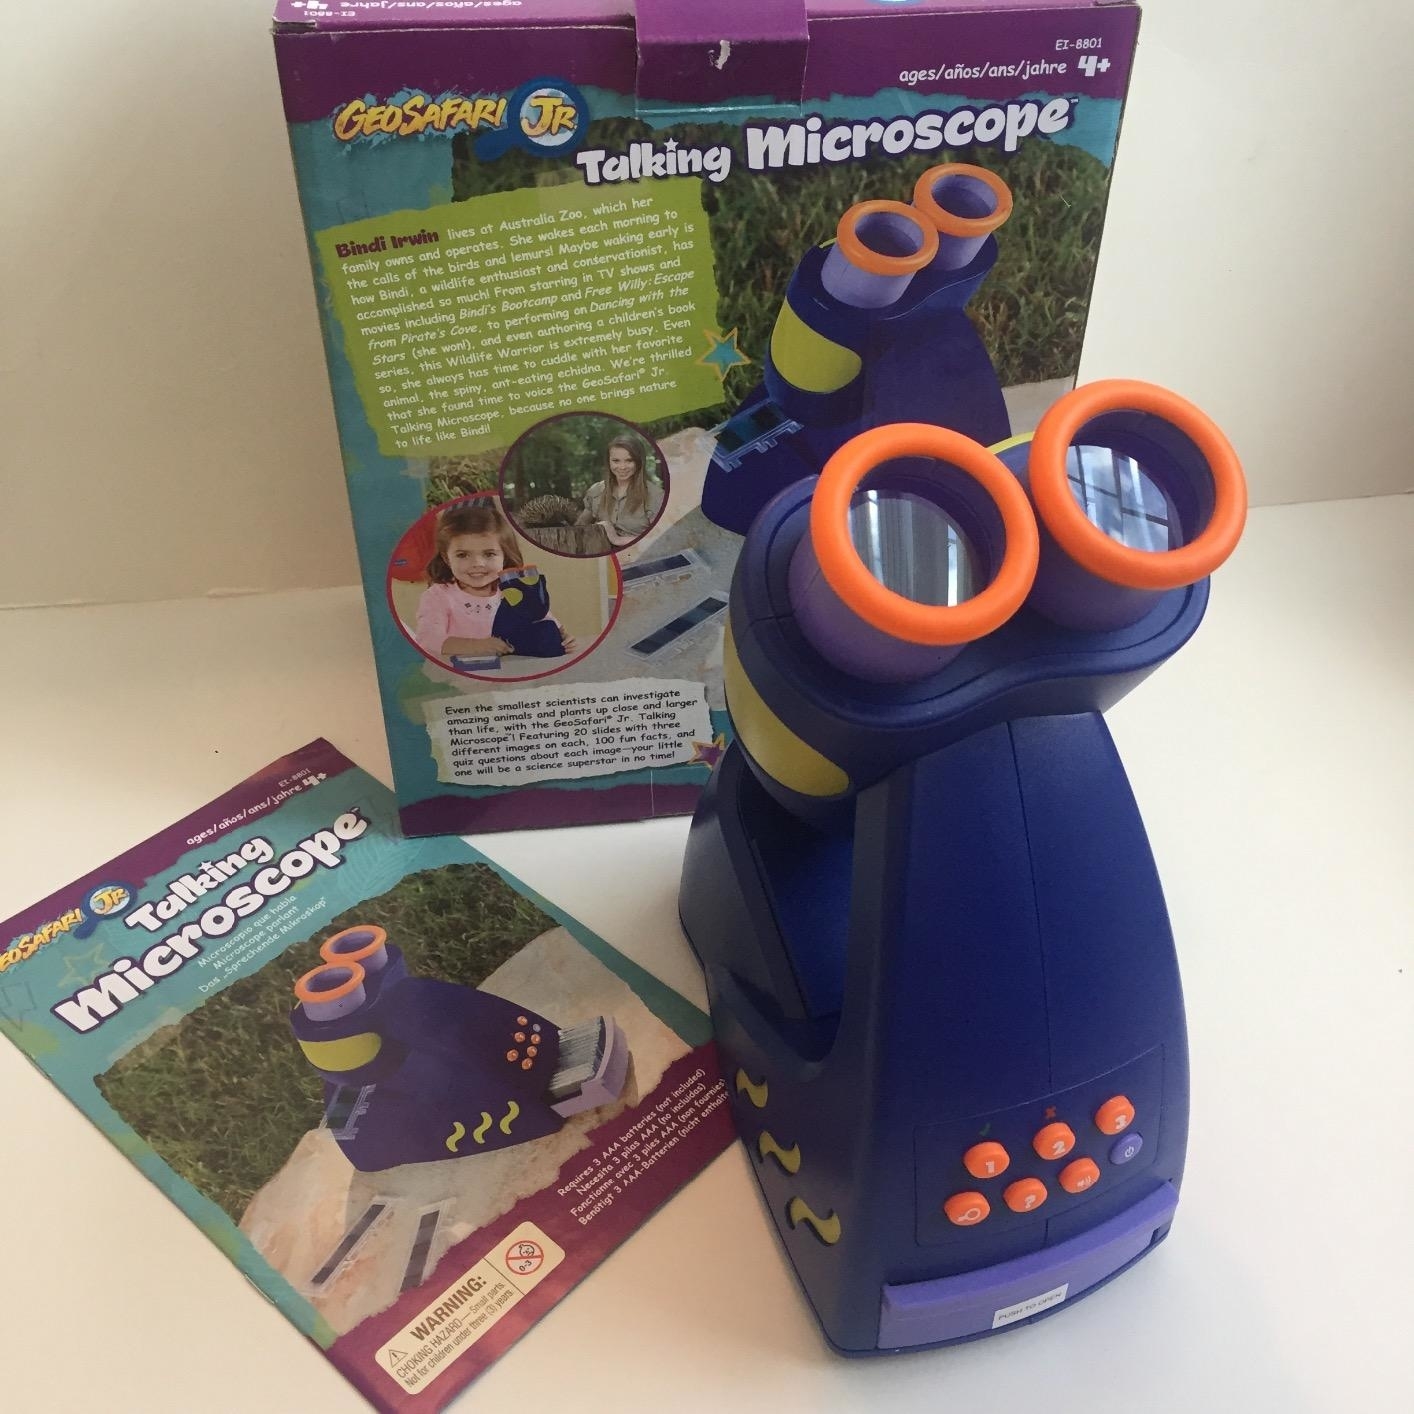 The microscope next to the box and instructions